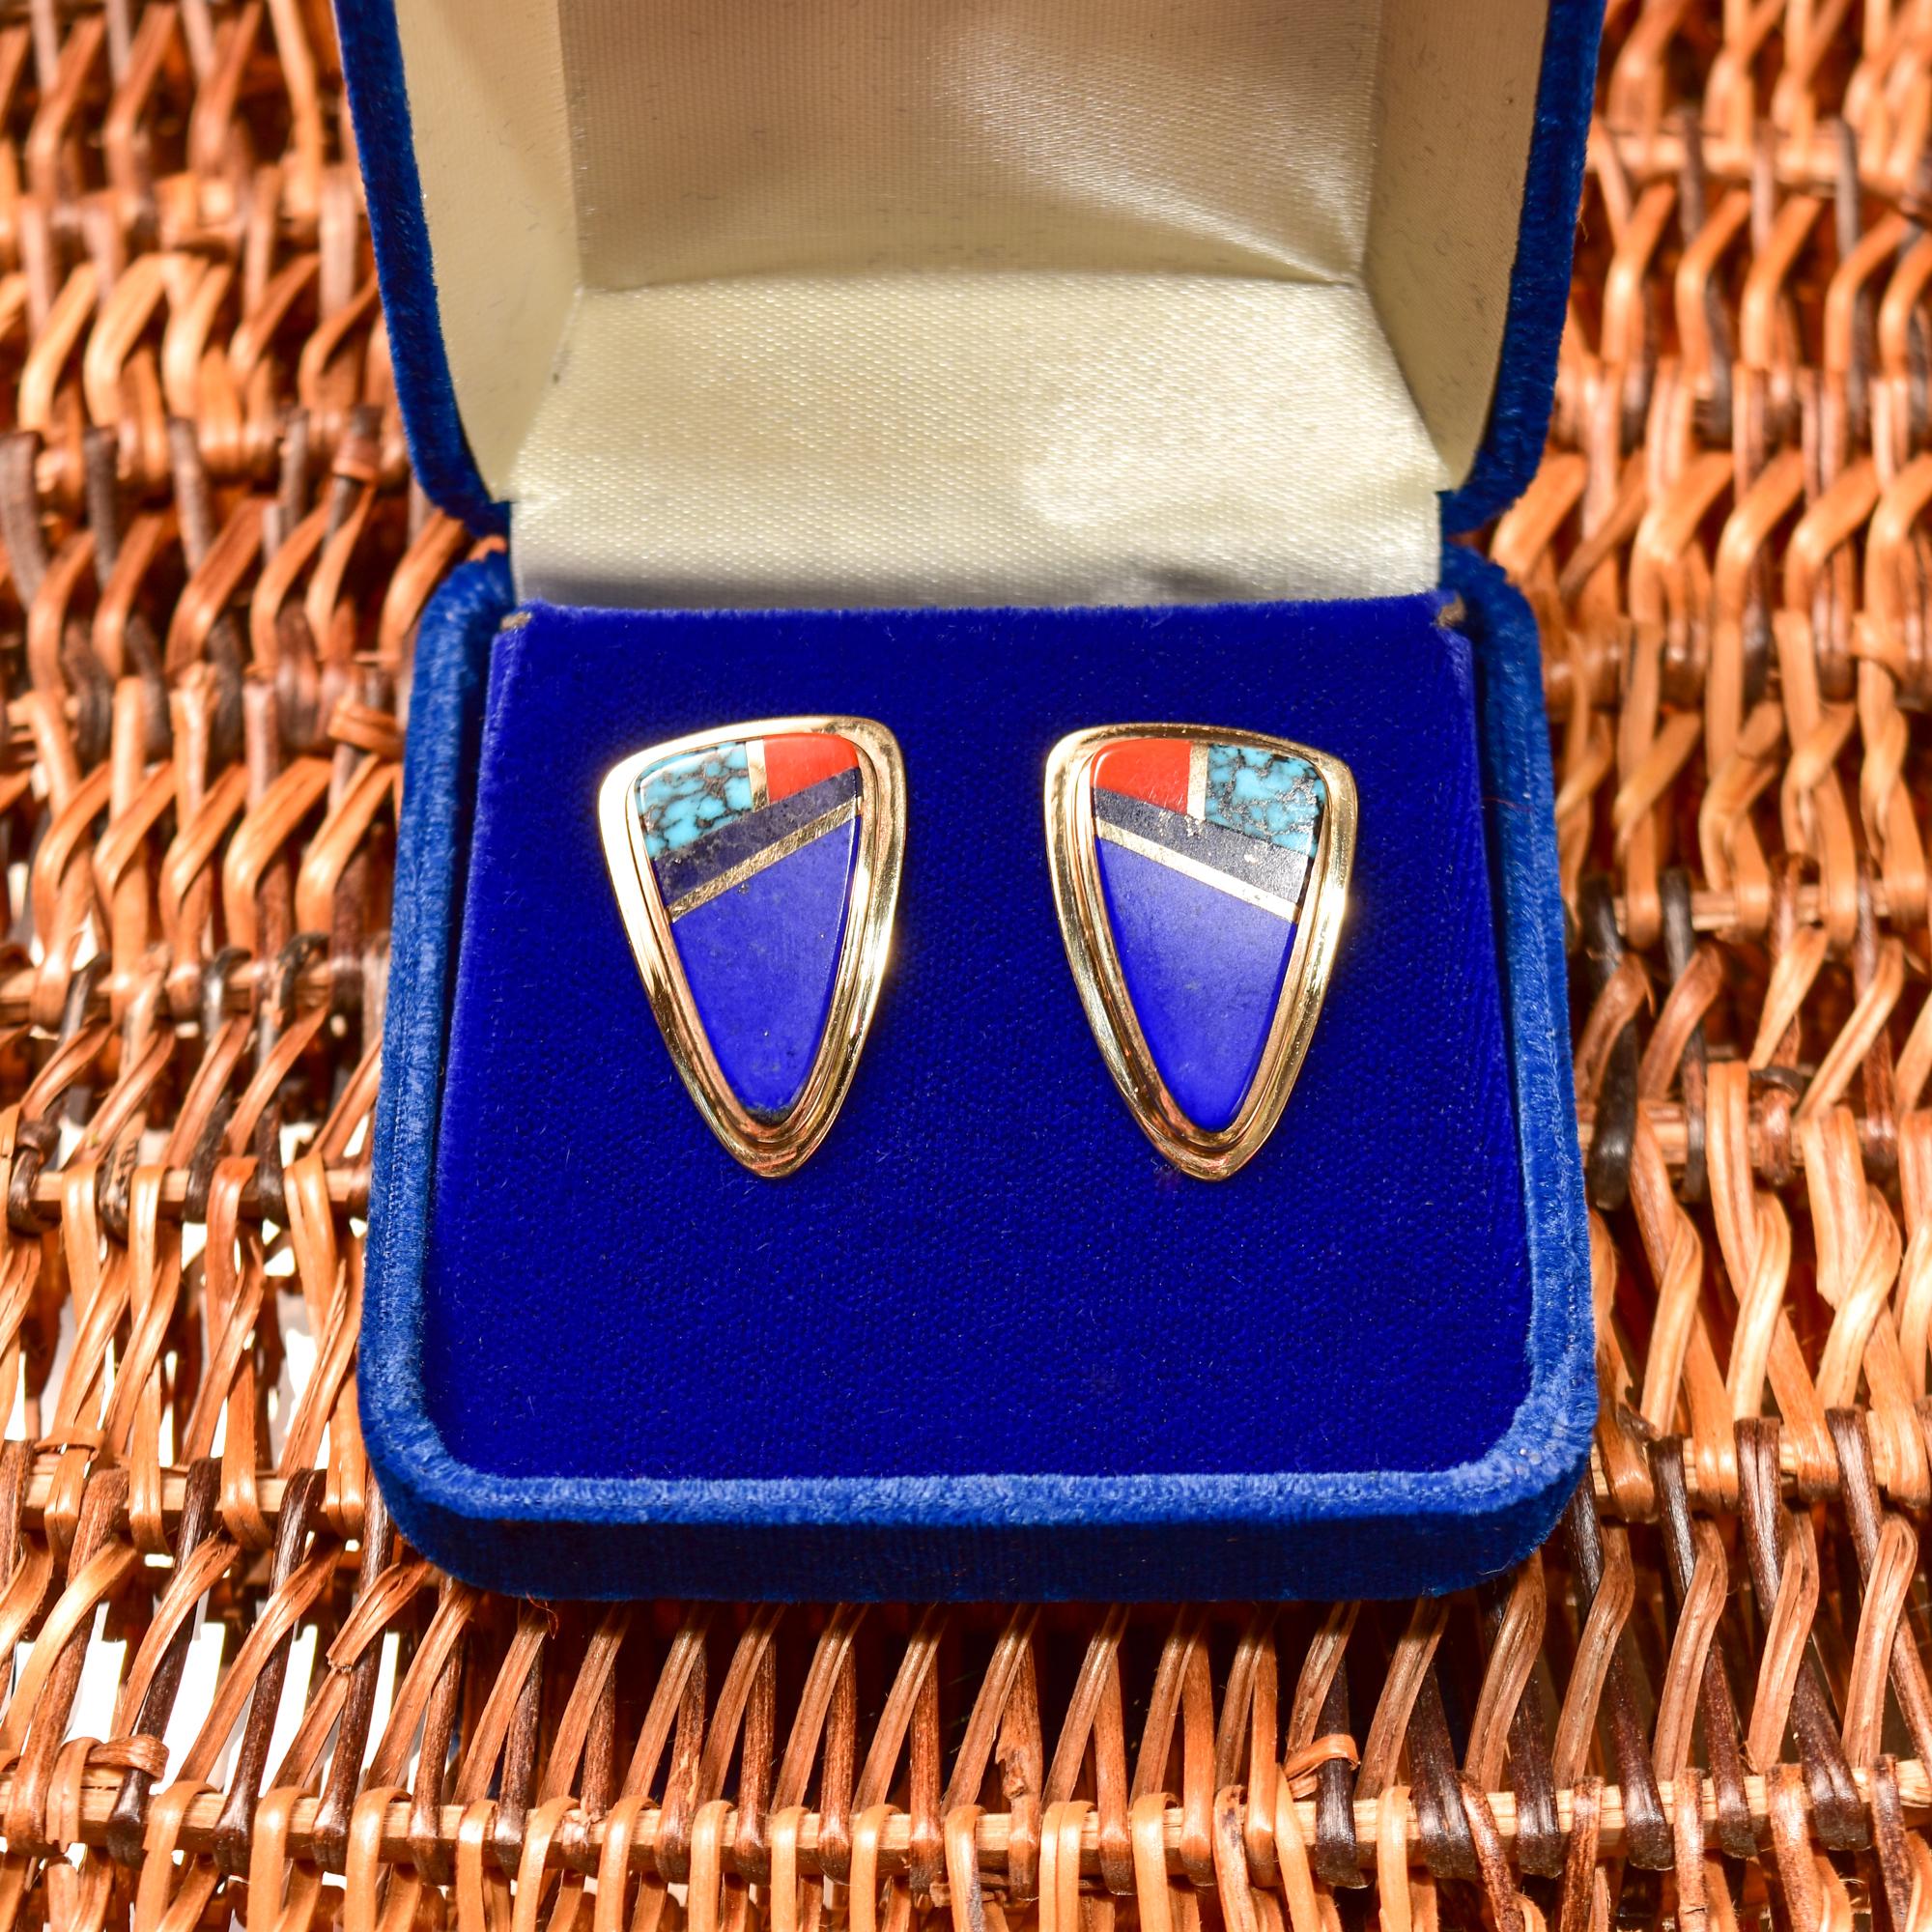 An iconic pair of Sonwai 14K inlay stud earrings by recognized Native American Indian lapidary artist, Verma Nequatewa. Verma learned her craft from her uncle, Charles Loloma, a renowned and influential 20th century Hopi Native American artist.